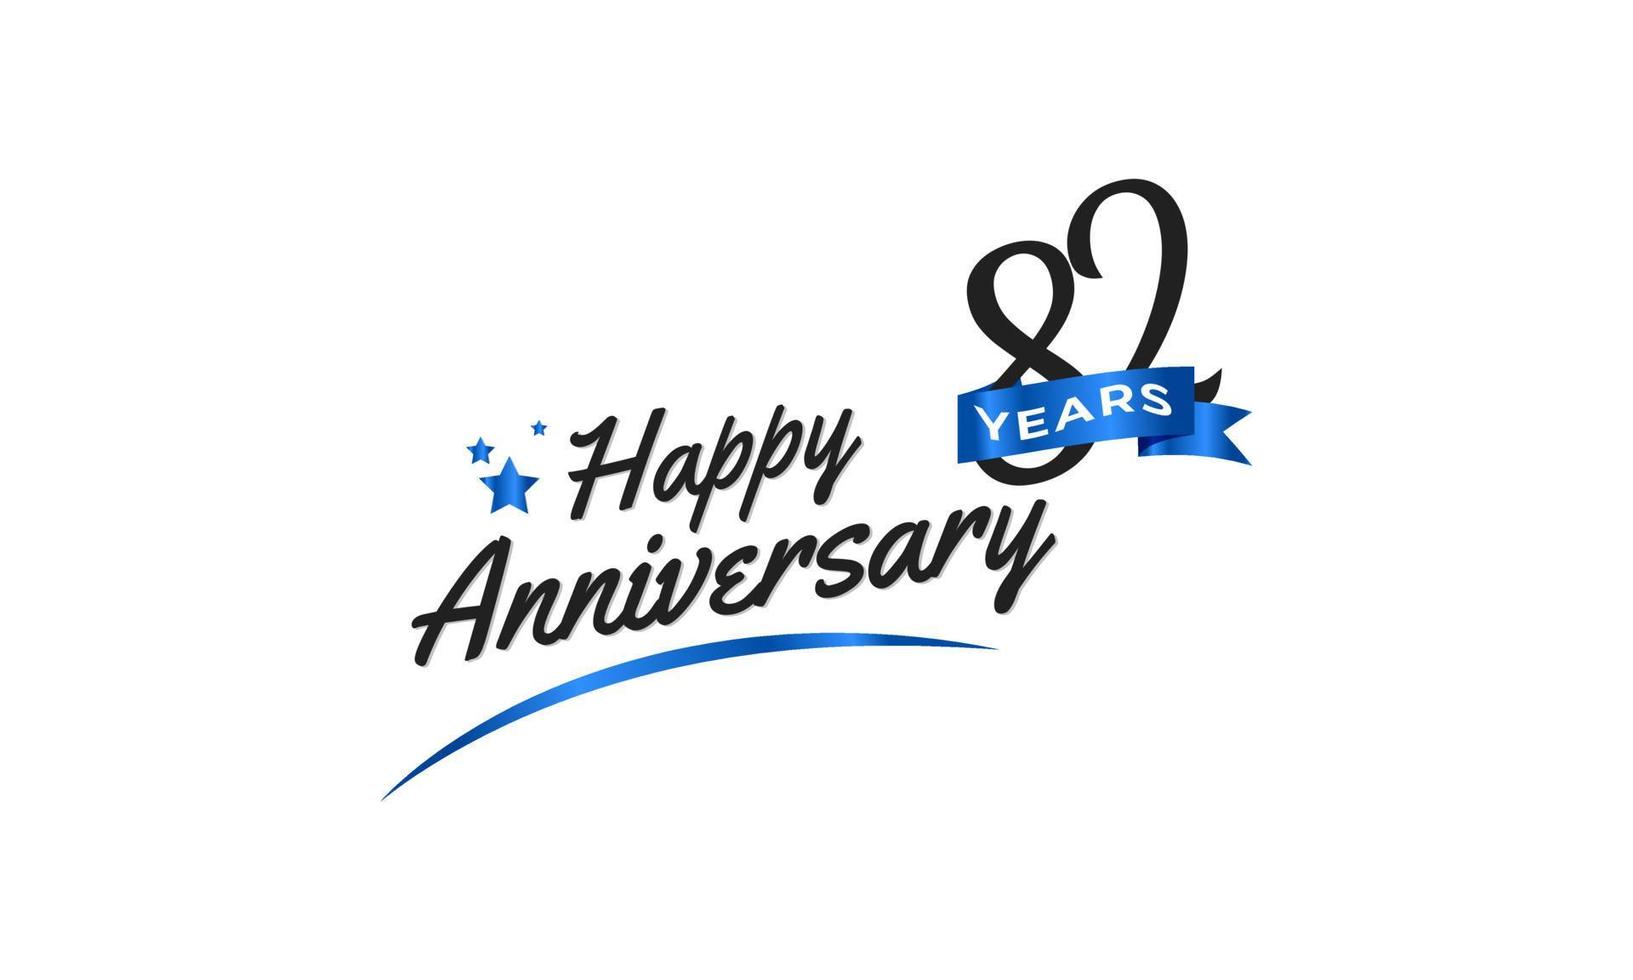 82 Year Anniversary Celebration with Blue Swoosh and Blue Ribbon Symbol. Happy Anniversary Greeting Celebrates Template Design Illustration vector